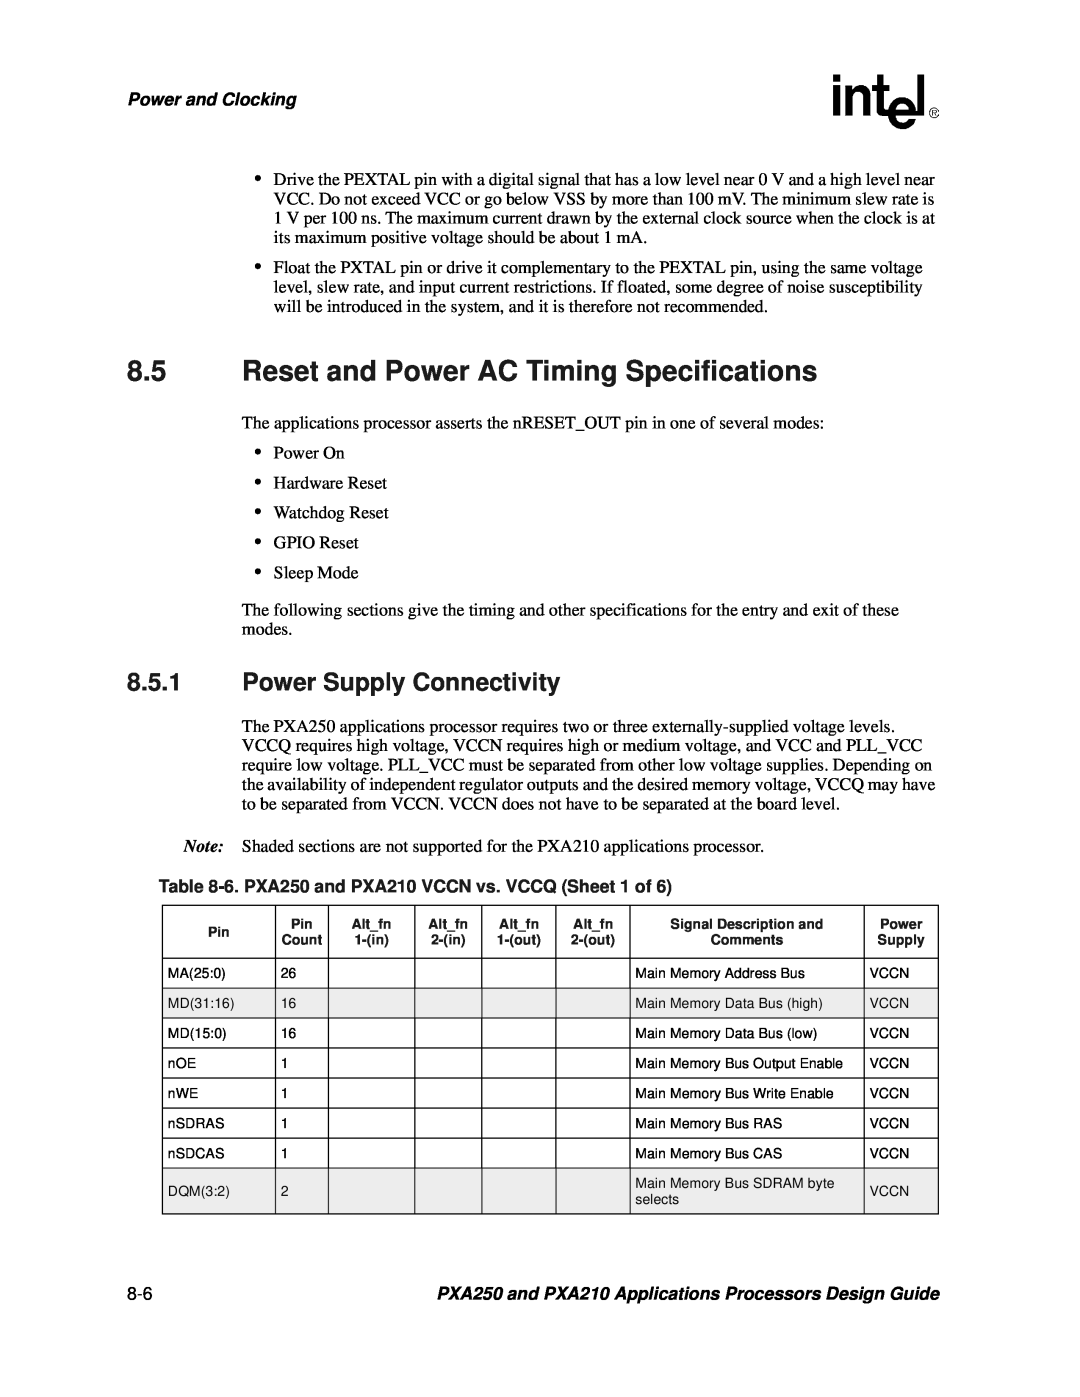 Intel PXA250 and PXA210 manual Reset and Power AC Timing Specifications, Power Supply Connectivity, Power and Clocking 